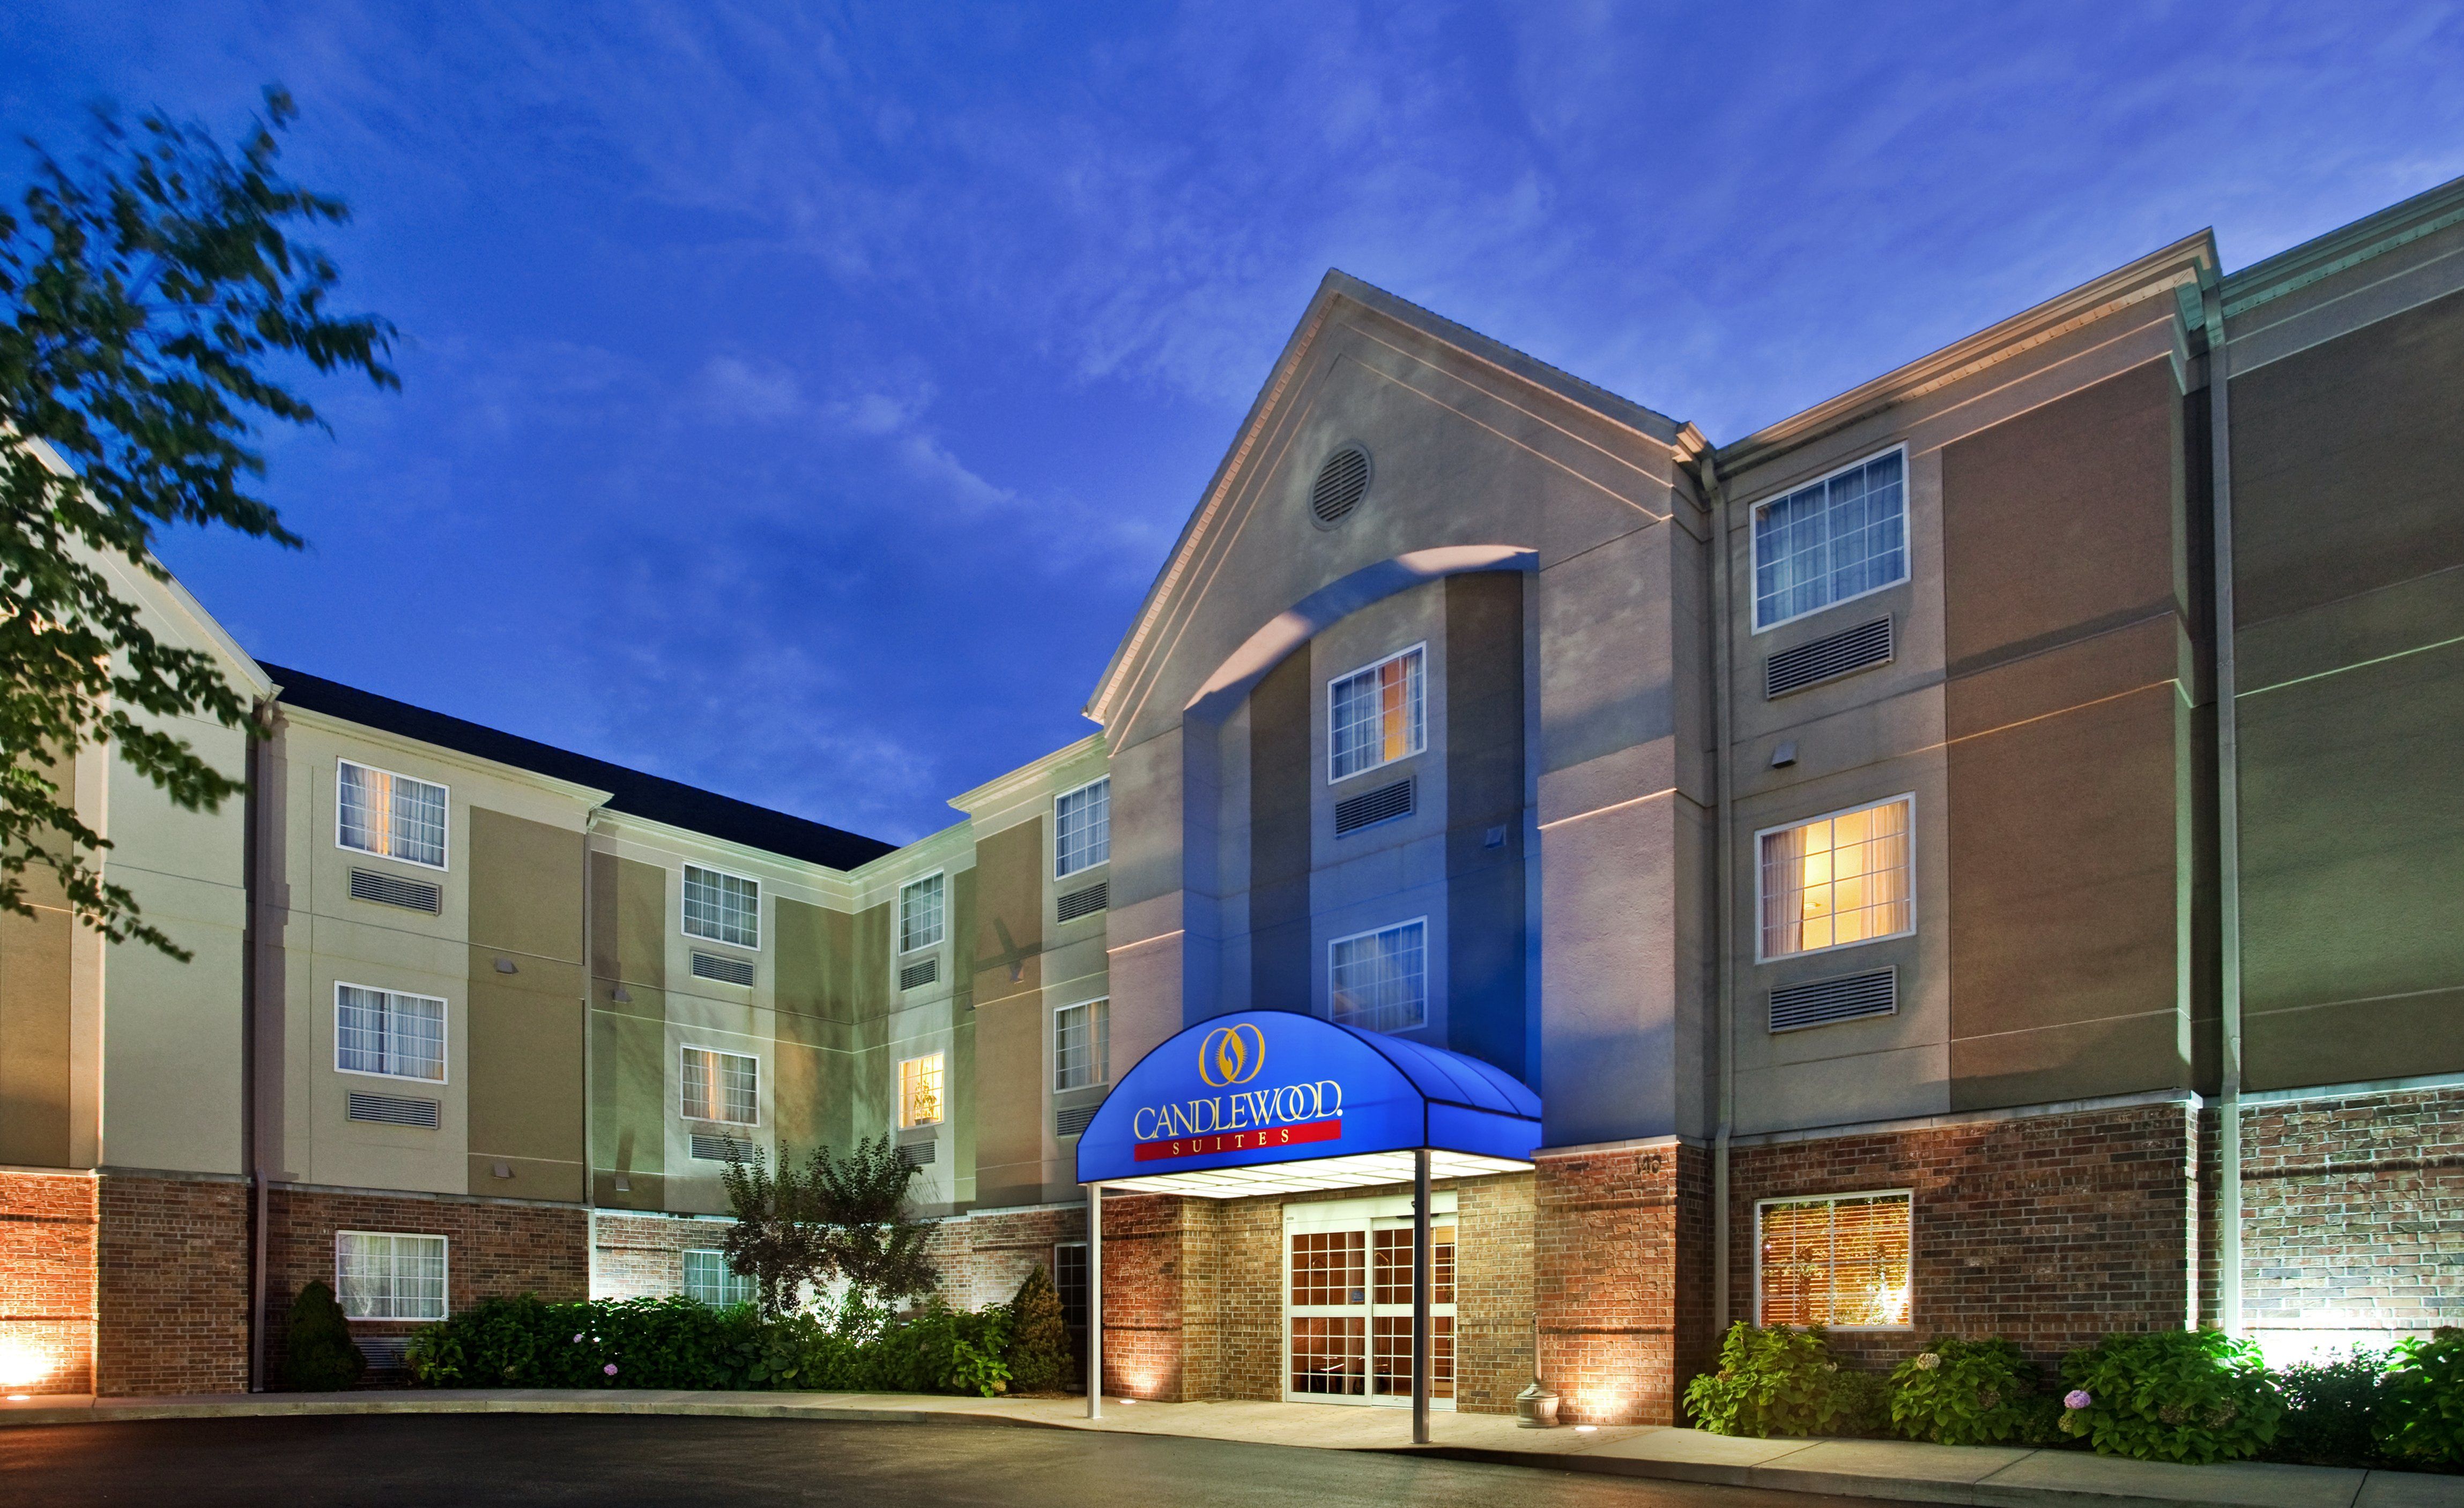 CANDLEWOOD SUITES HAZLETON - BOOK YOUR STAY IN ADVANCE AND SAVE ON GREAT  RATES